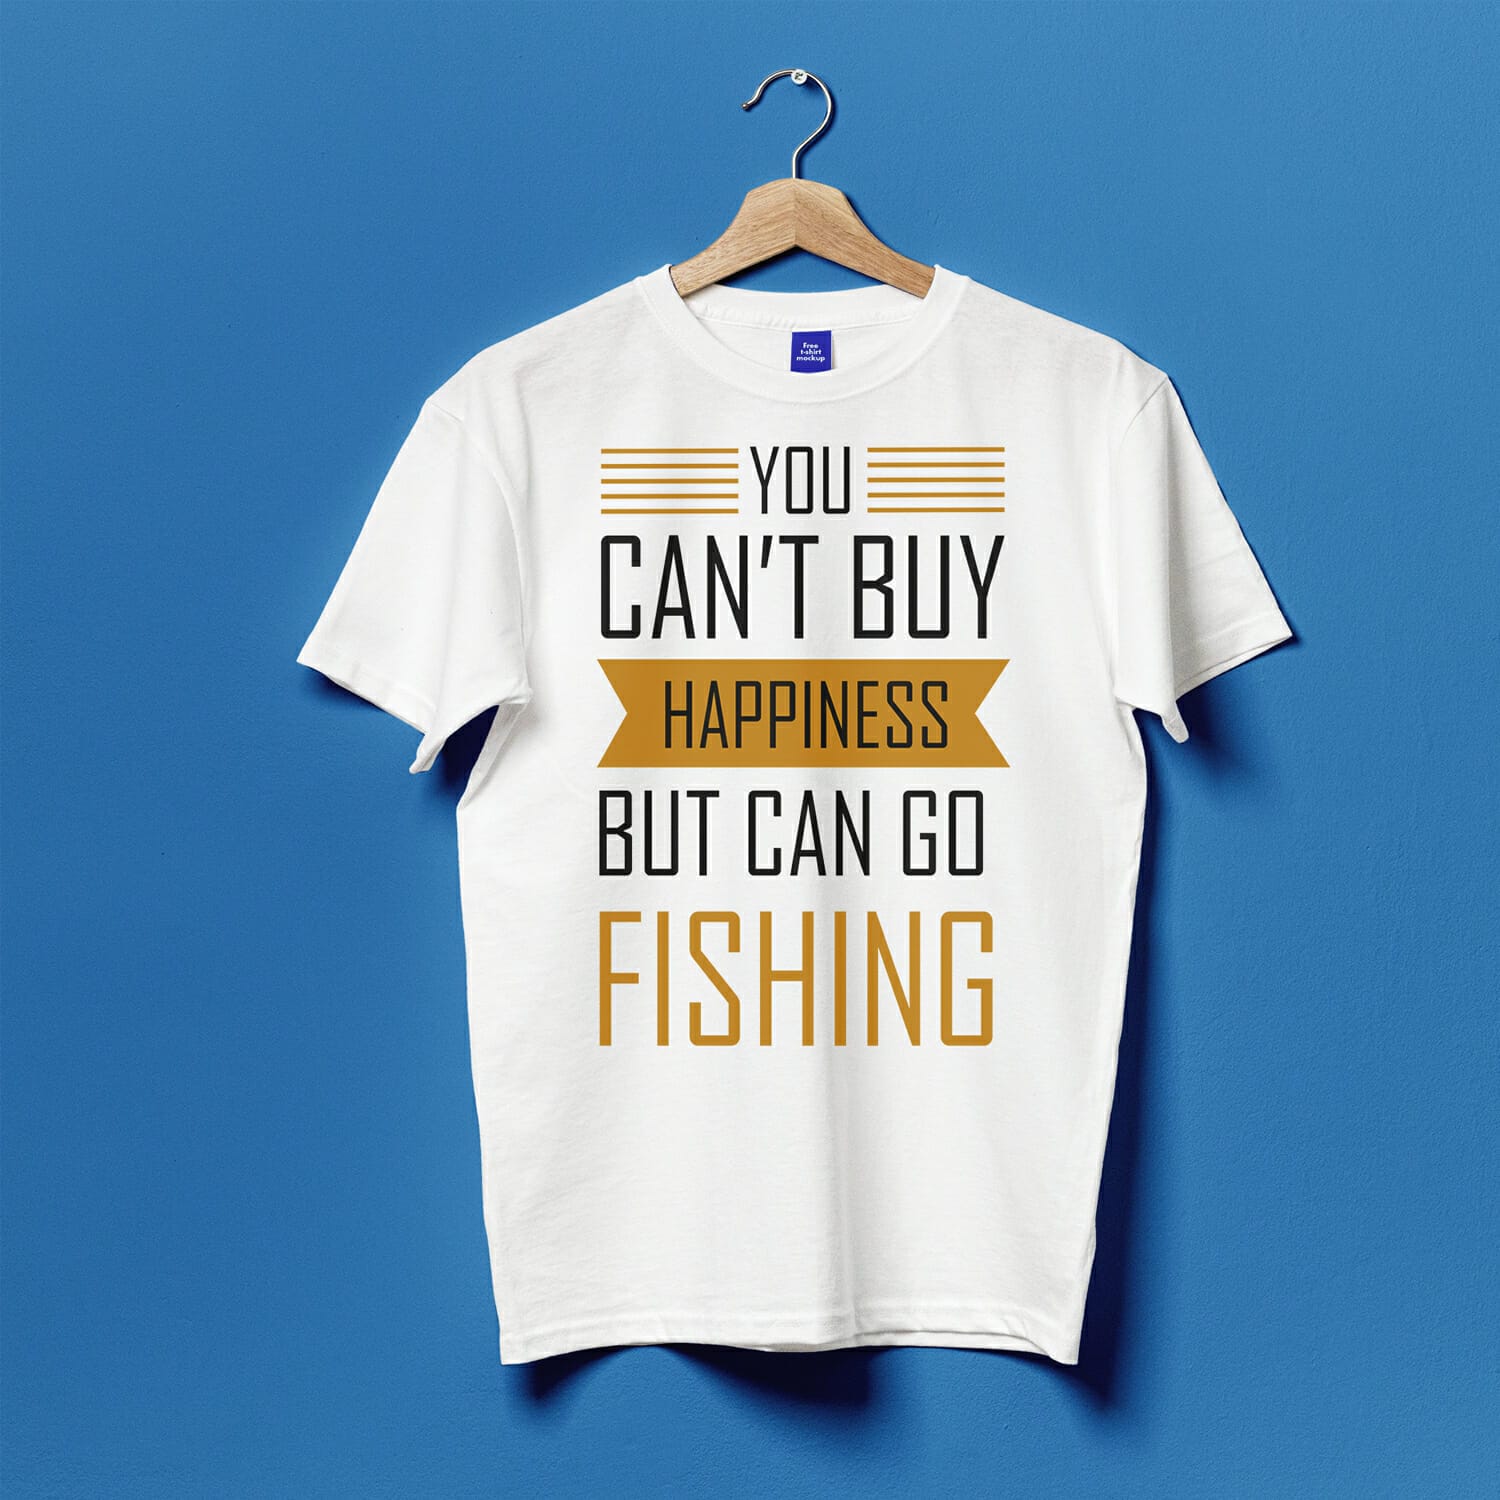 You can't buy Happiness but can go Fishing T-shirt Design